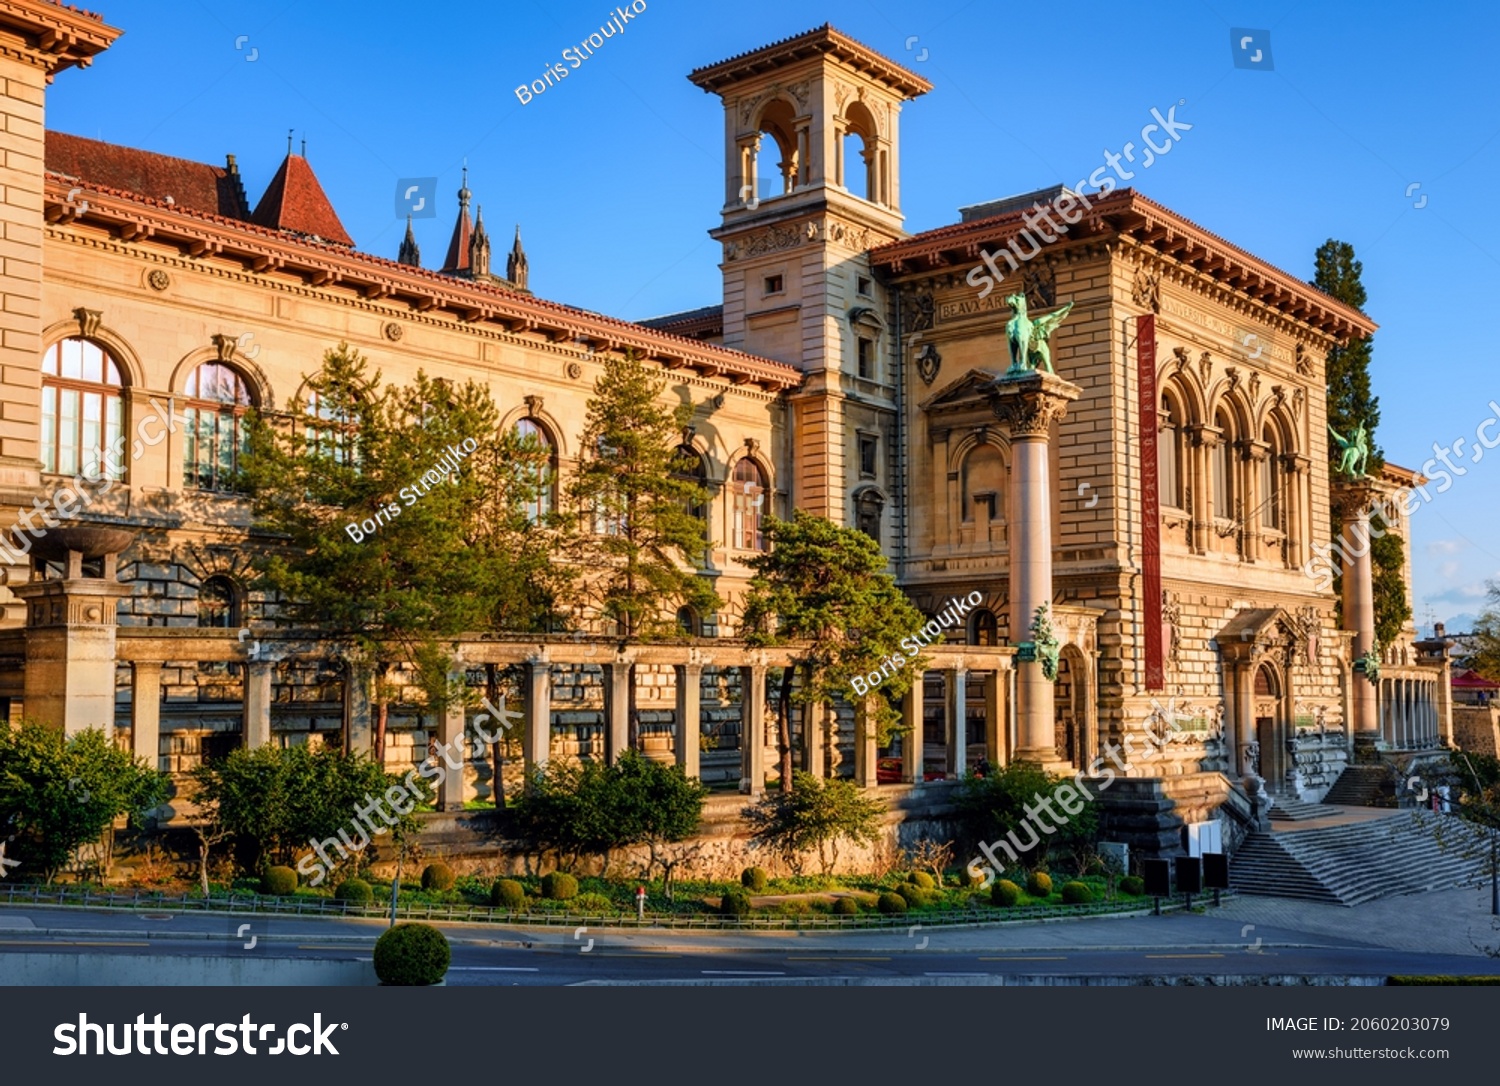 Palais de Rumine, a historical building in Lausanne city center, Switzerland, housing the Lausanne University and different museums #2060203079